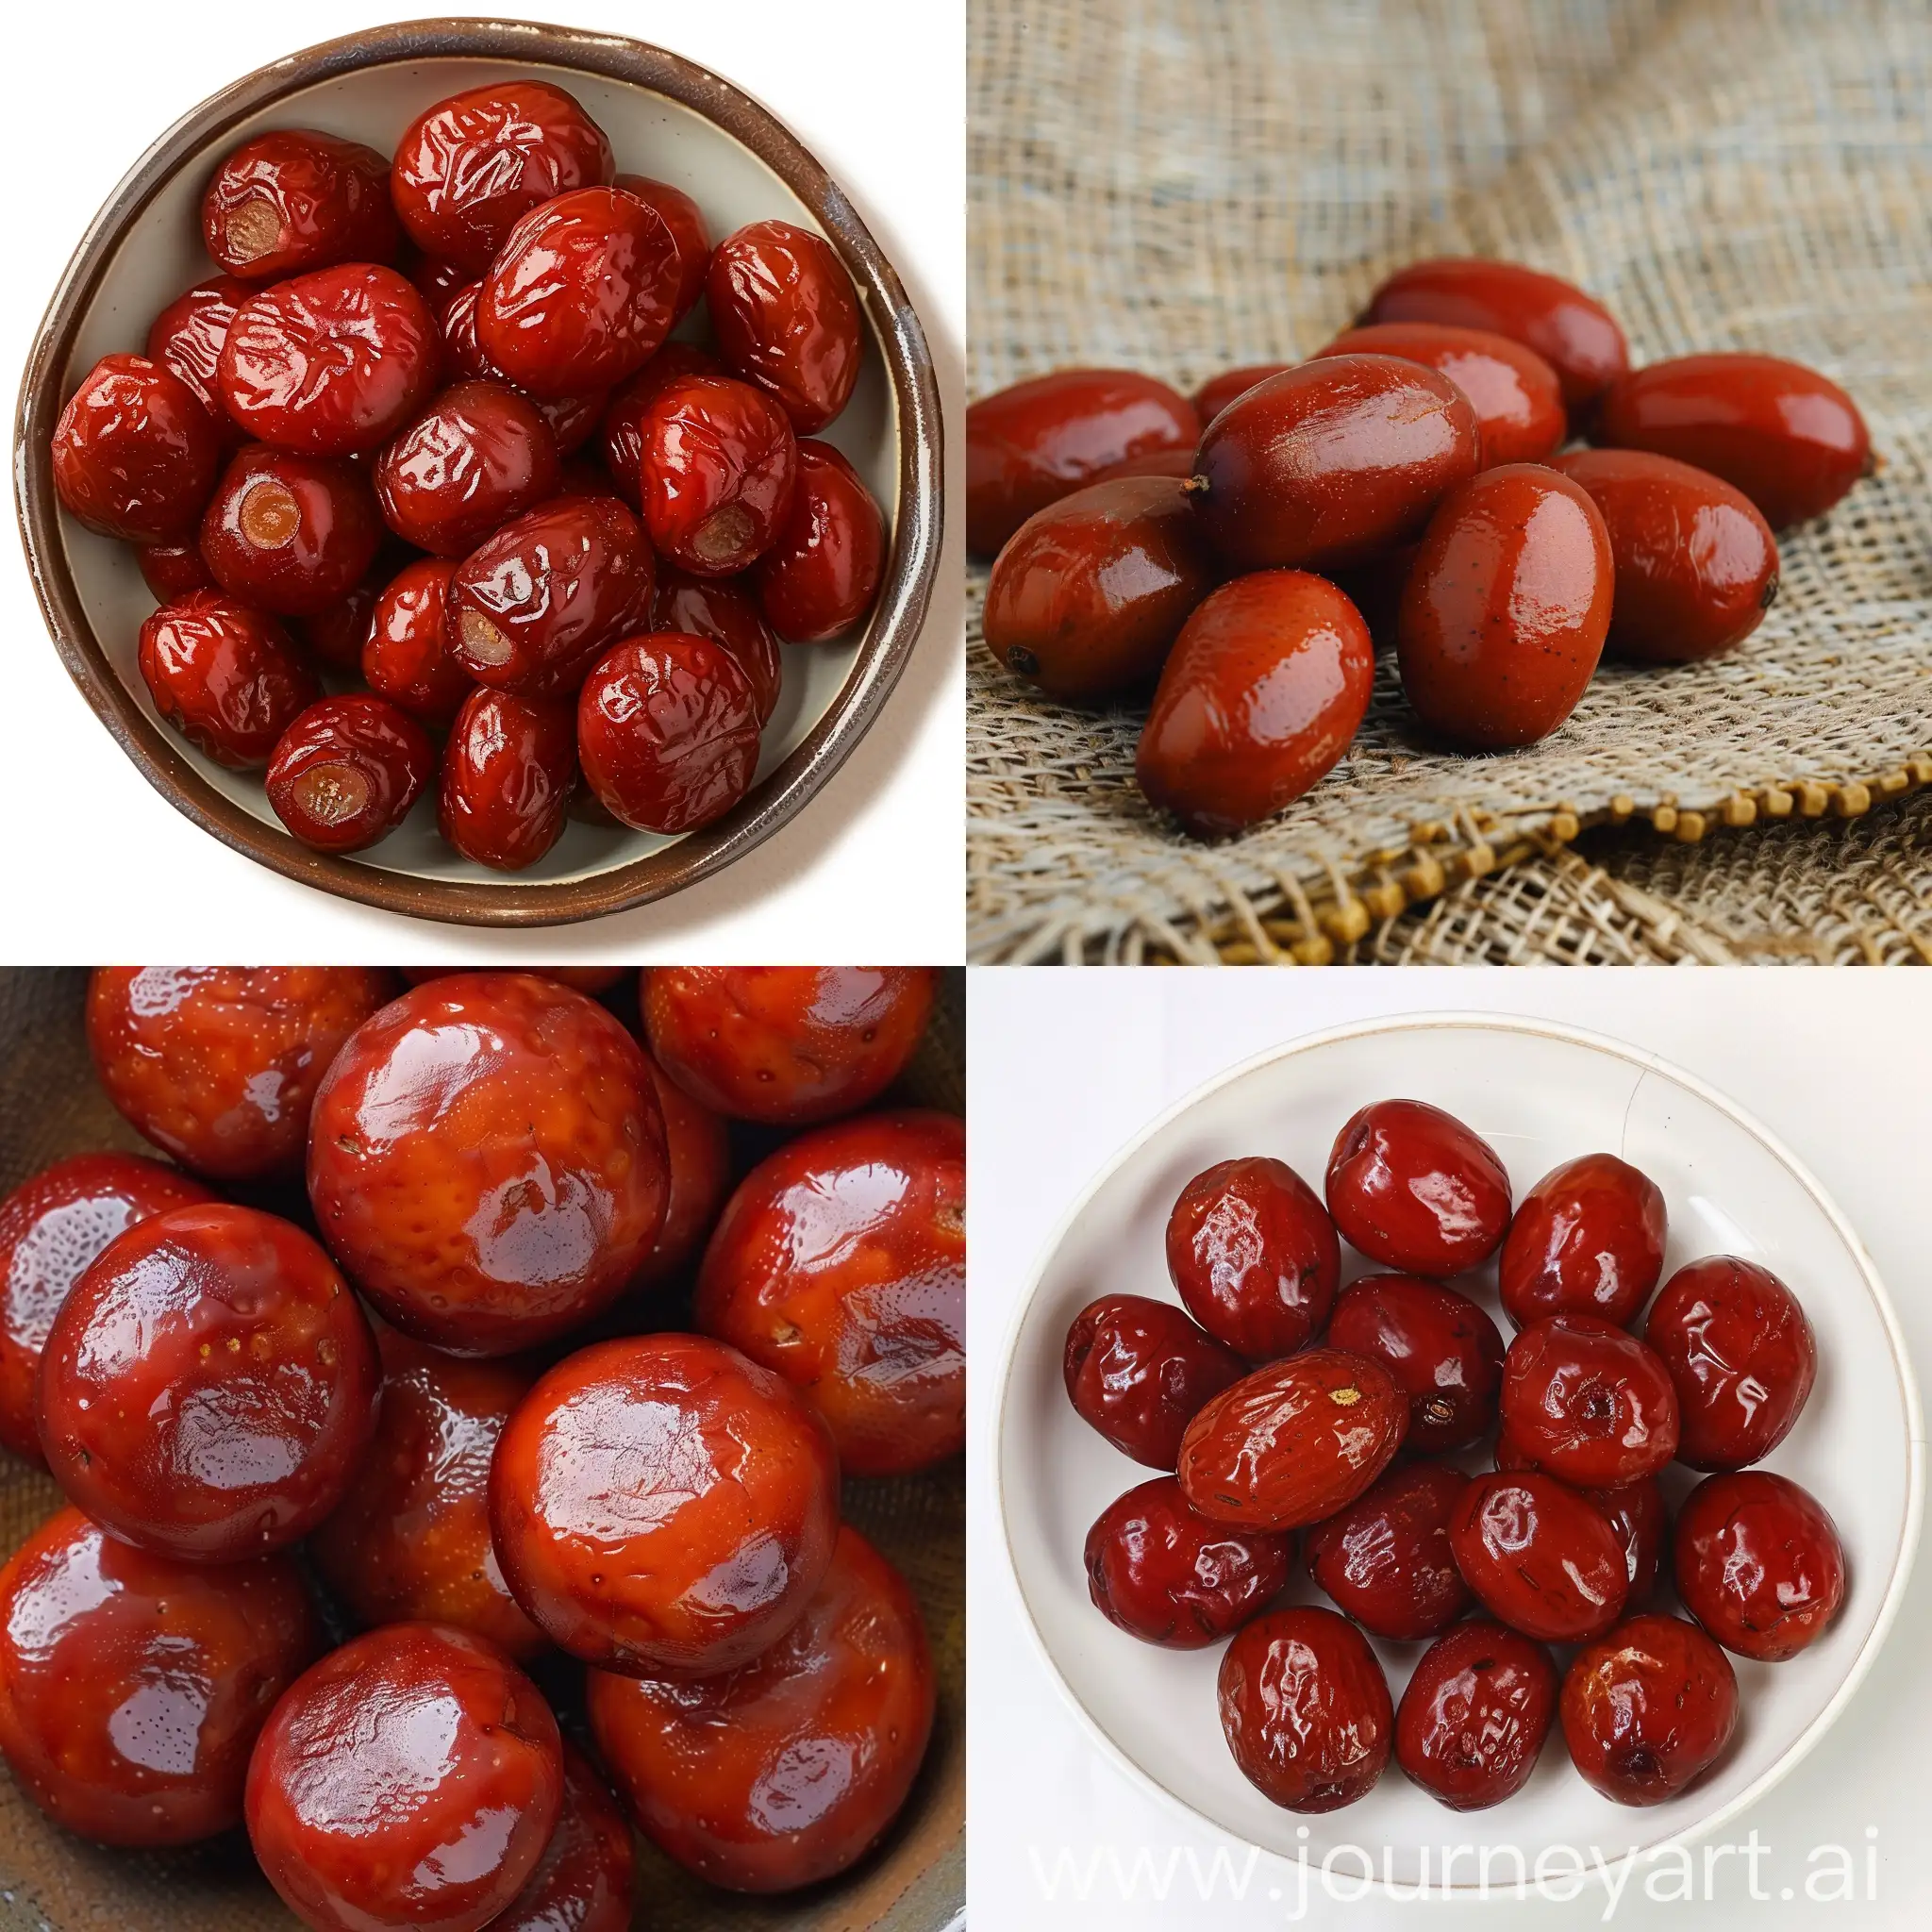 Bright-Jujube-Fruits-in-Sunlight-Symbolizing-Health-and-Vitality